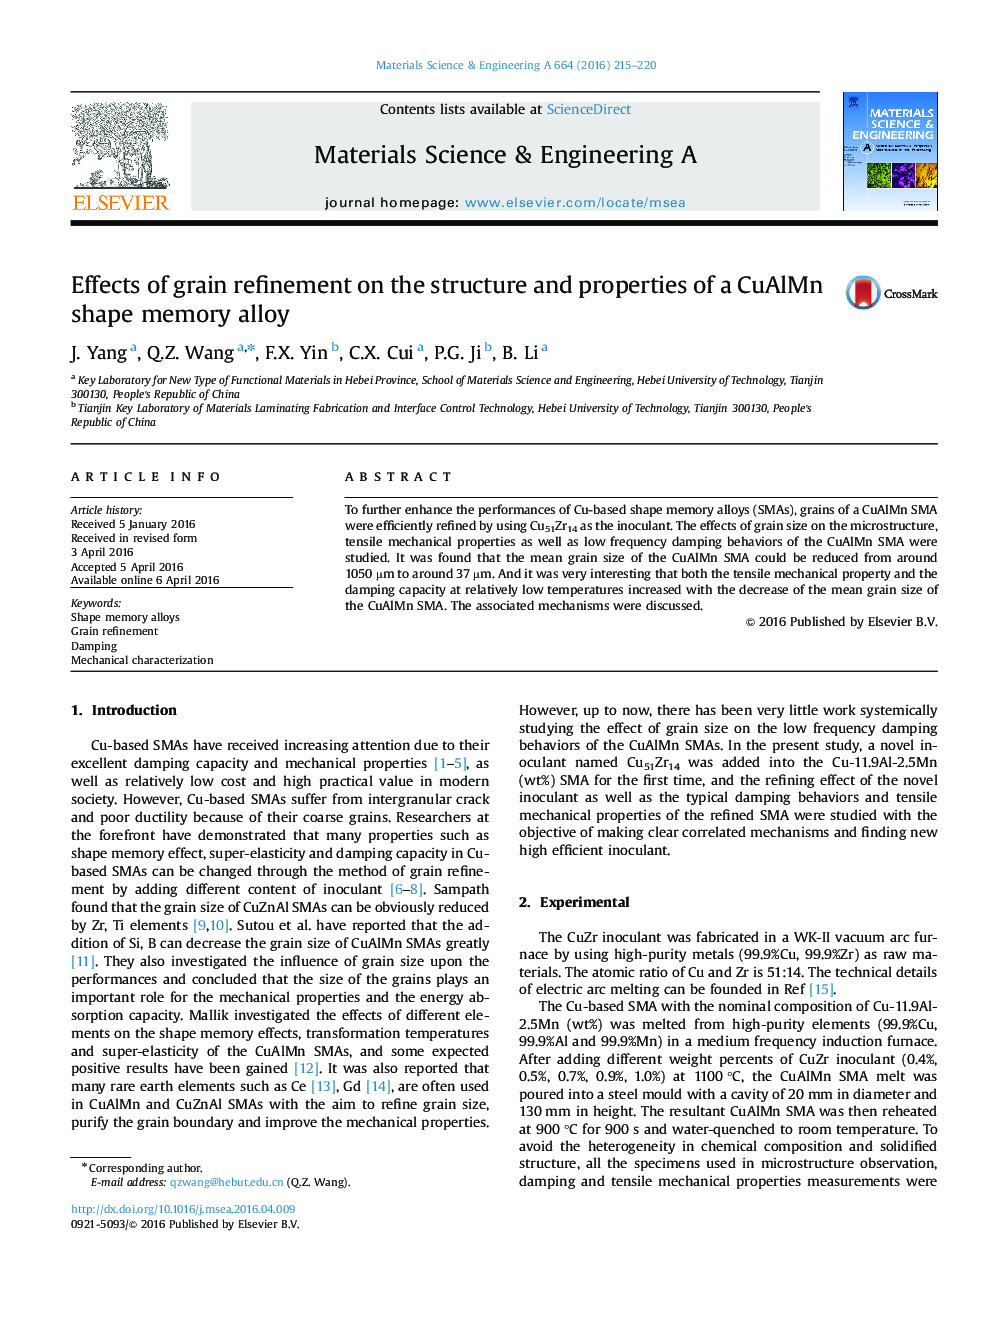 Effects of grain refinement on the structure and properties of a CuAlMn shape memory alloy